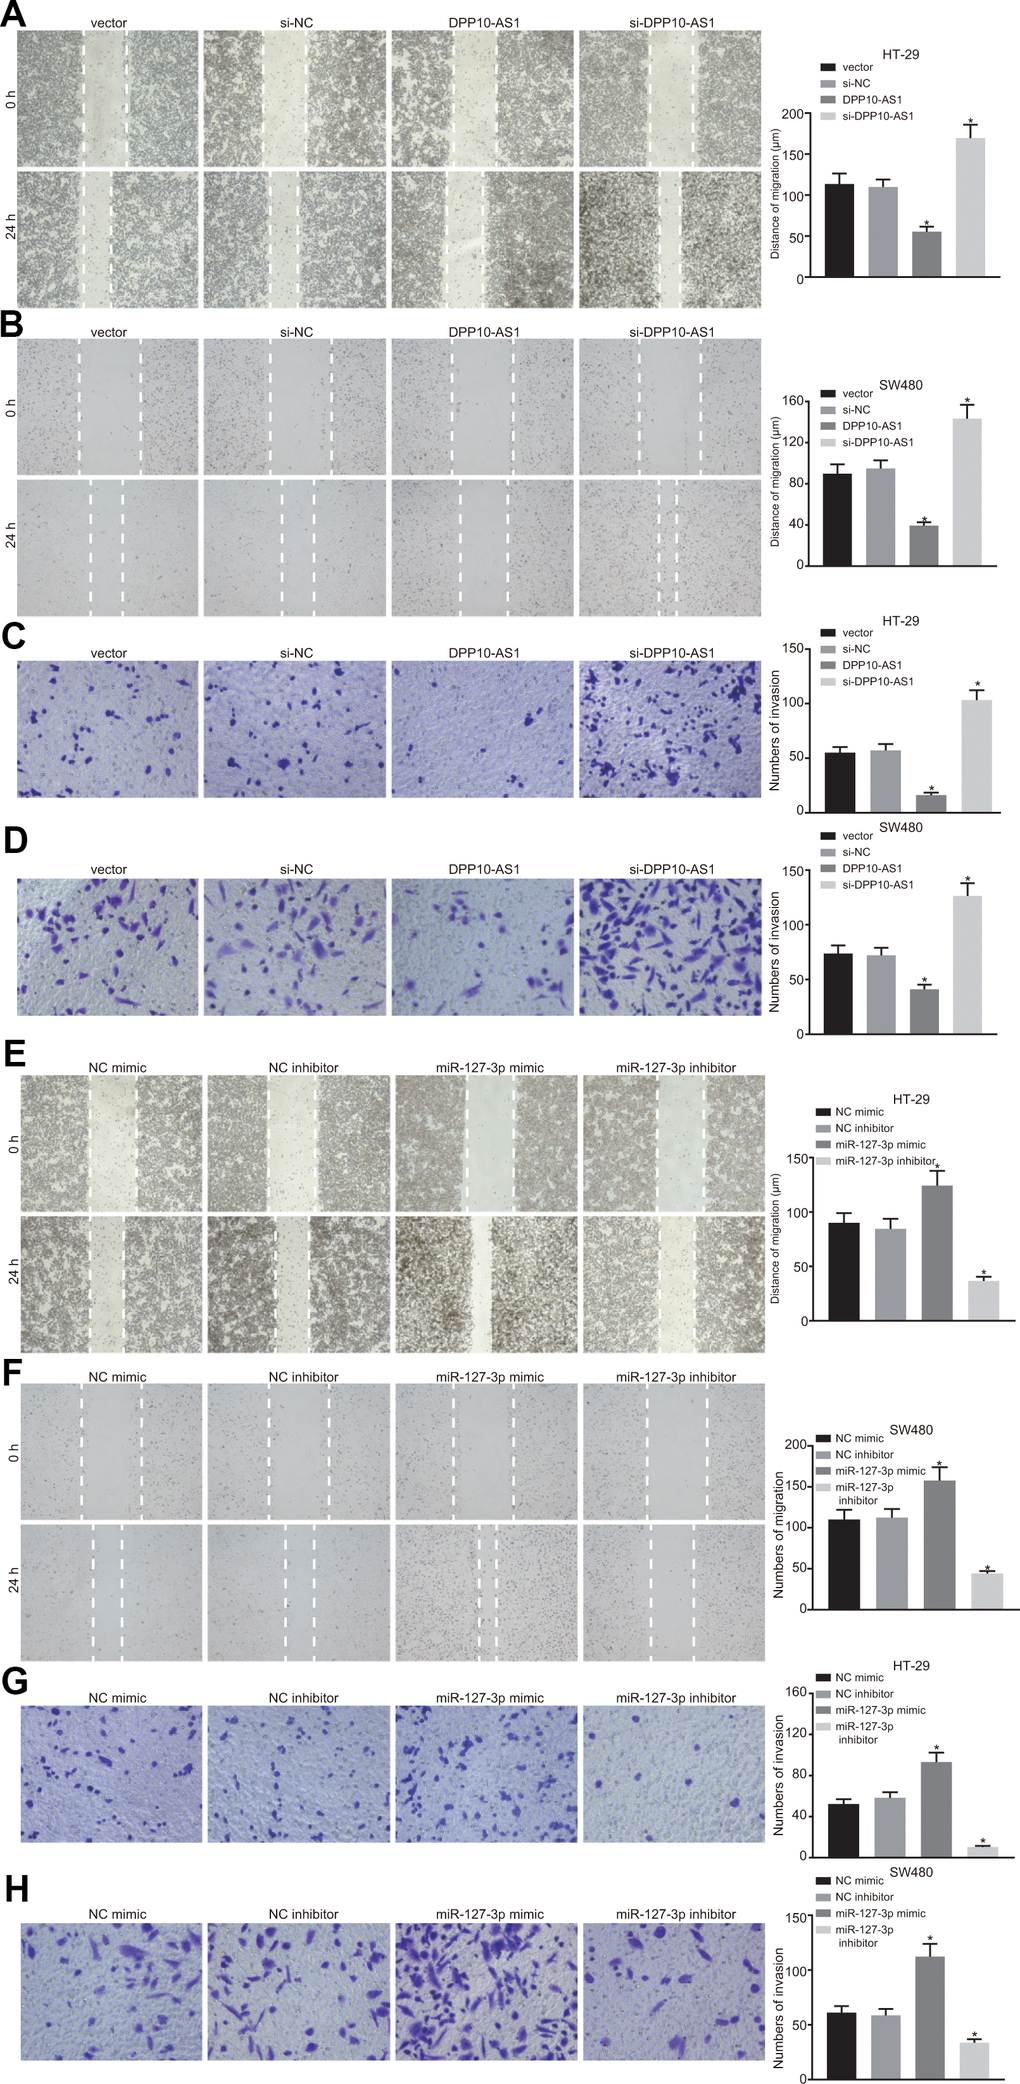 Upregulation of DPP10-AS1 and downregulation of miR-127-3p suppress the migration and invasion of HT-29 SW480 stem cells. (A–D) HT-29 and SW480 stem cell migration and invasion abilities evaluated by scratch test and transwell assay after DPP10-AS1 expression was altered when DPP10-AS1 was interfered. (E–H) HT-29 and SW480 stem cell migration and invasion abilities determined using scratch test and transwell assay after miR-127-3p expression was varied. *, p vs. vector and si-NC, or NC mimic and NC inhibitor. The measurement data were expressed as mean ± standard deviation. The data among multiple groups were analyzed by one-way ANOVA followed by a Tukey’s post hoc test. The experiment was repeated three times. DPP10-AS1, cells transfected with DPP10-AS1 plasmid; si-DPP10-AS1, cells transfected with si-DPP10-AS1; si-NC, cells transfected with si-negative control plasmid; miR-127-3p mimic, cells transfected with miR-127-3p mimic plasmid; NC mimic, cells transfected with negative control mimic plasmid.